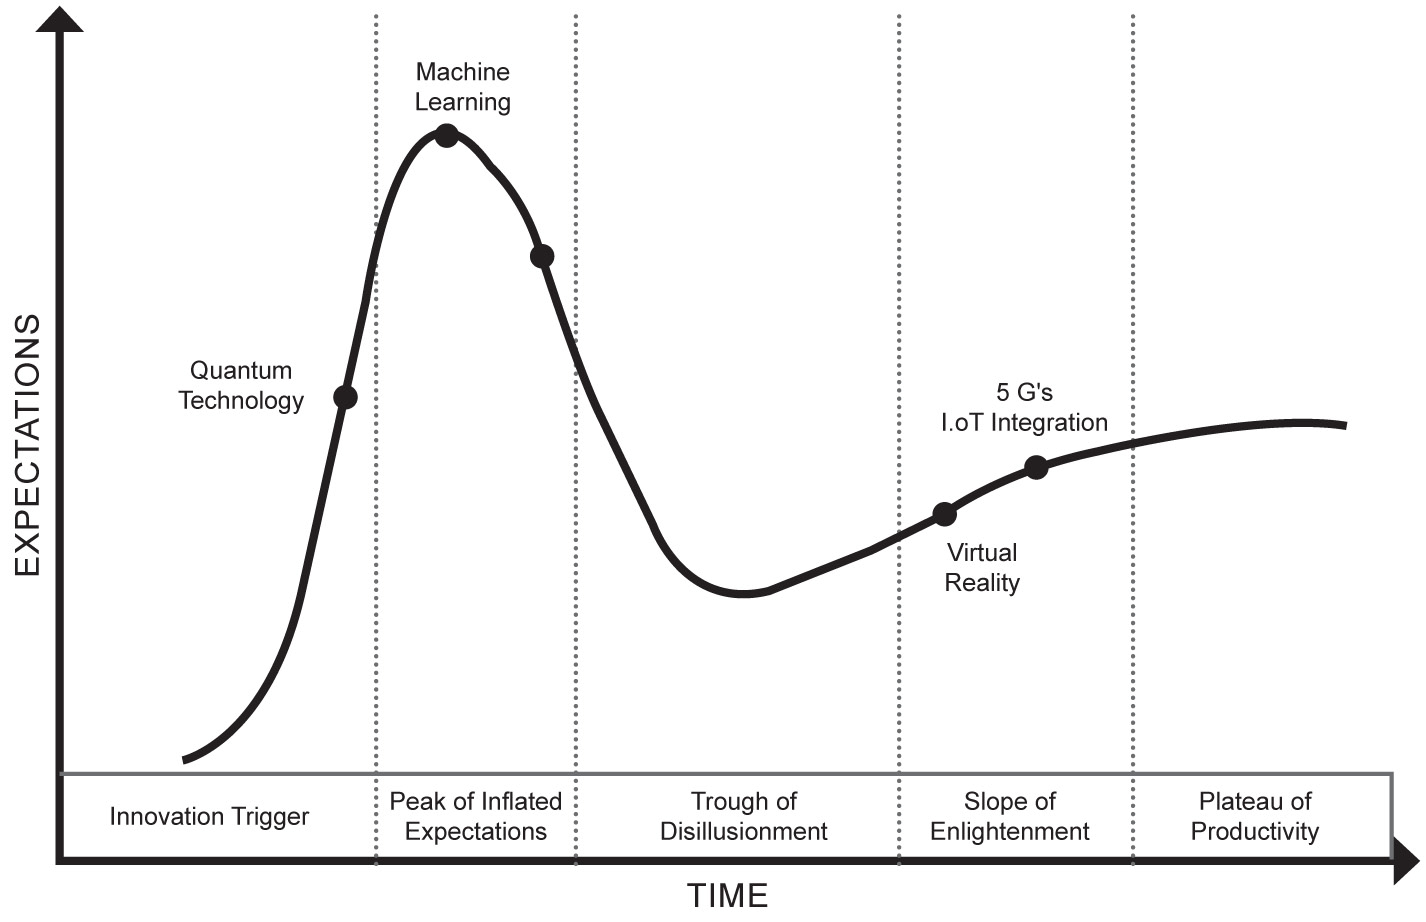 The technology hype cycle and where quantum technology lies on it.